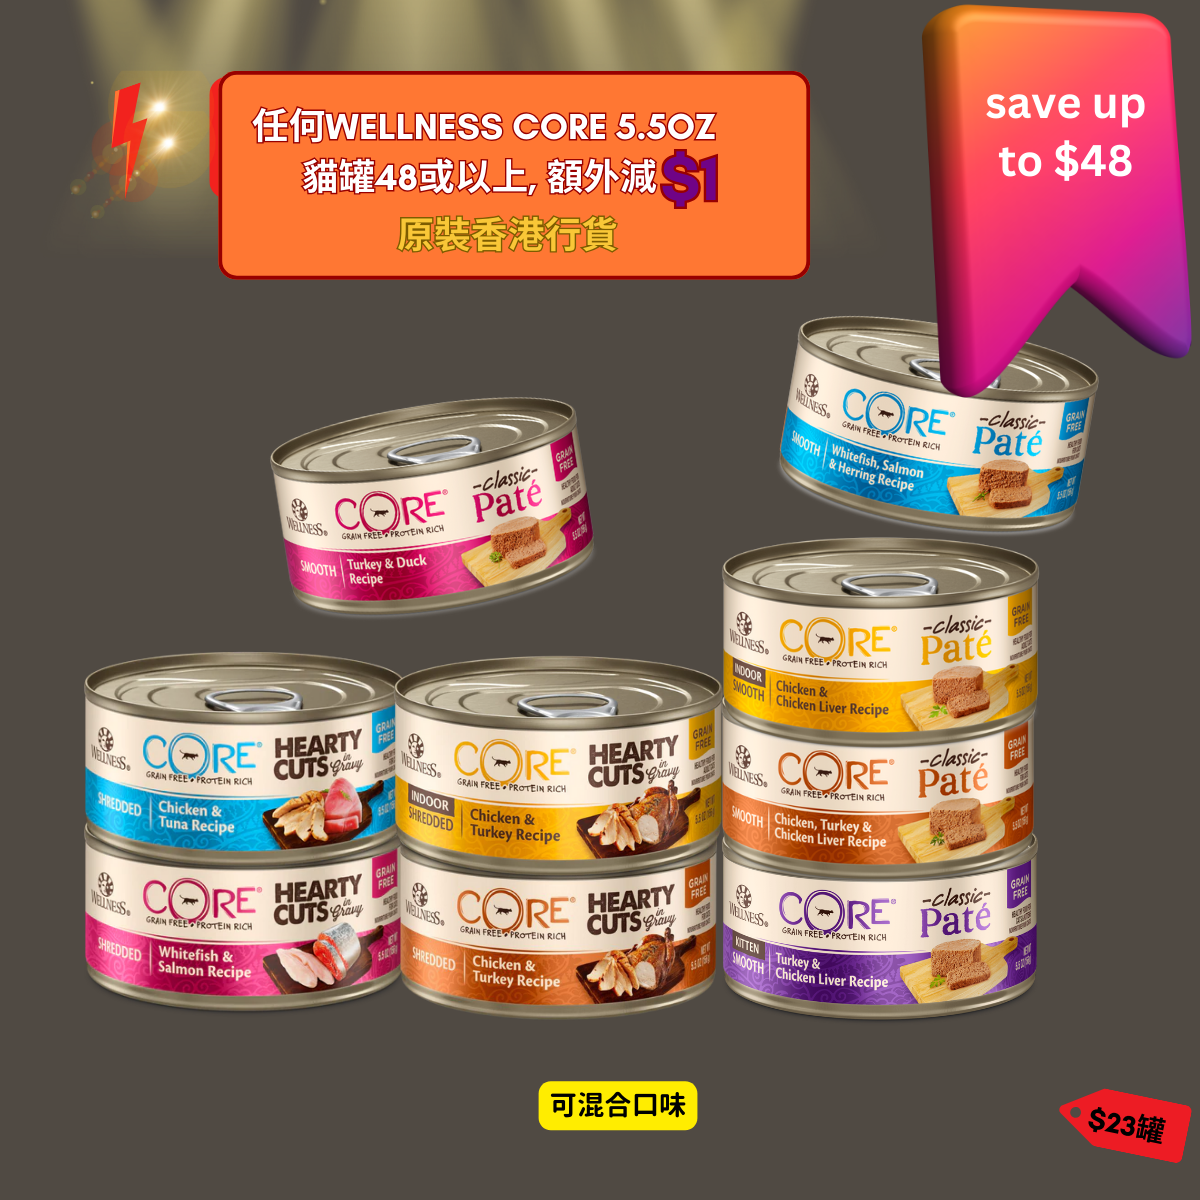 Wellness Core Additional Discount 1200 x 1200 px).png__PID:4c75a654-274c-4390-8fab-4e51f08e057d